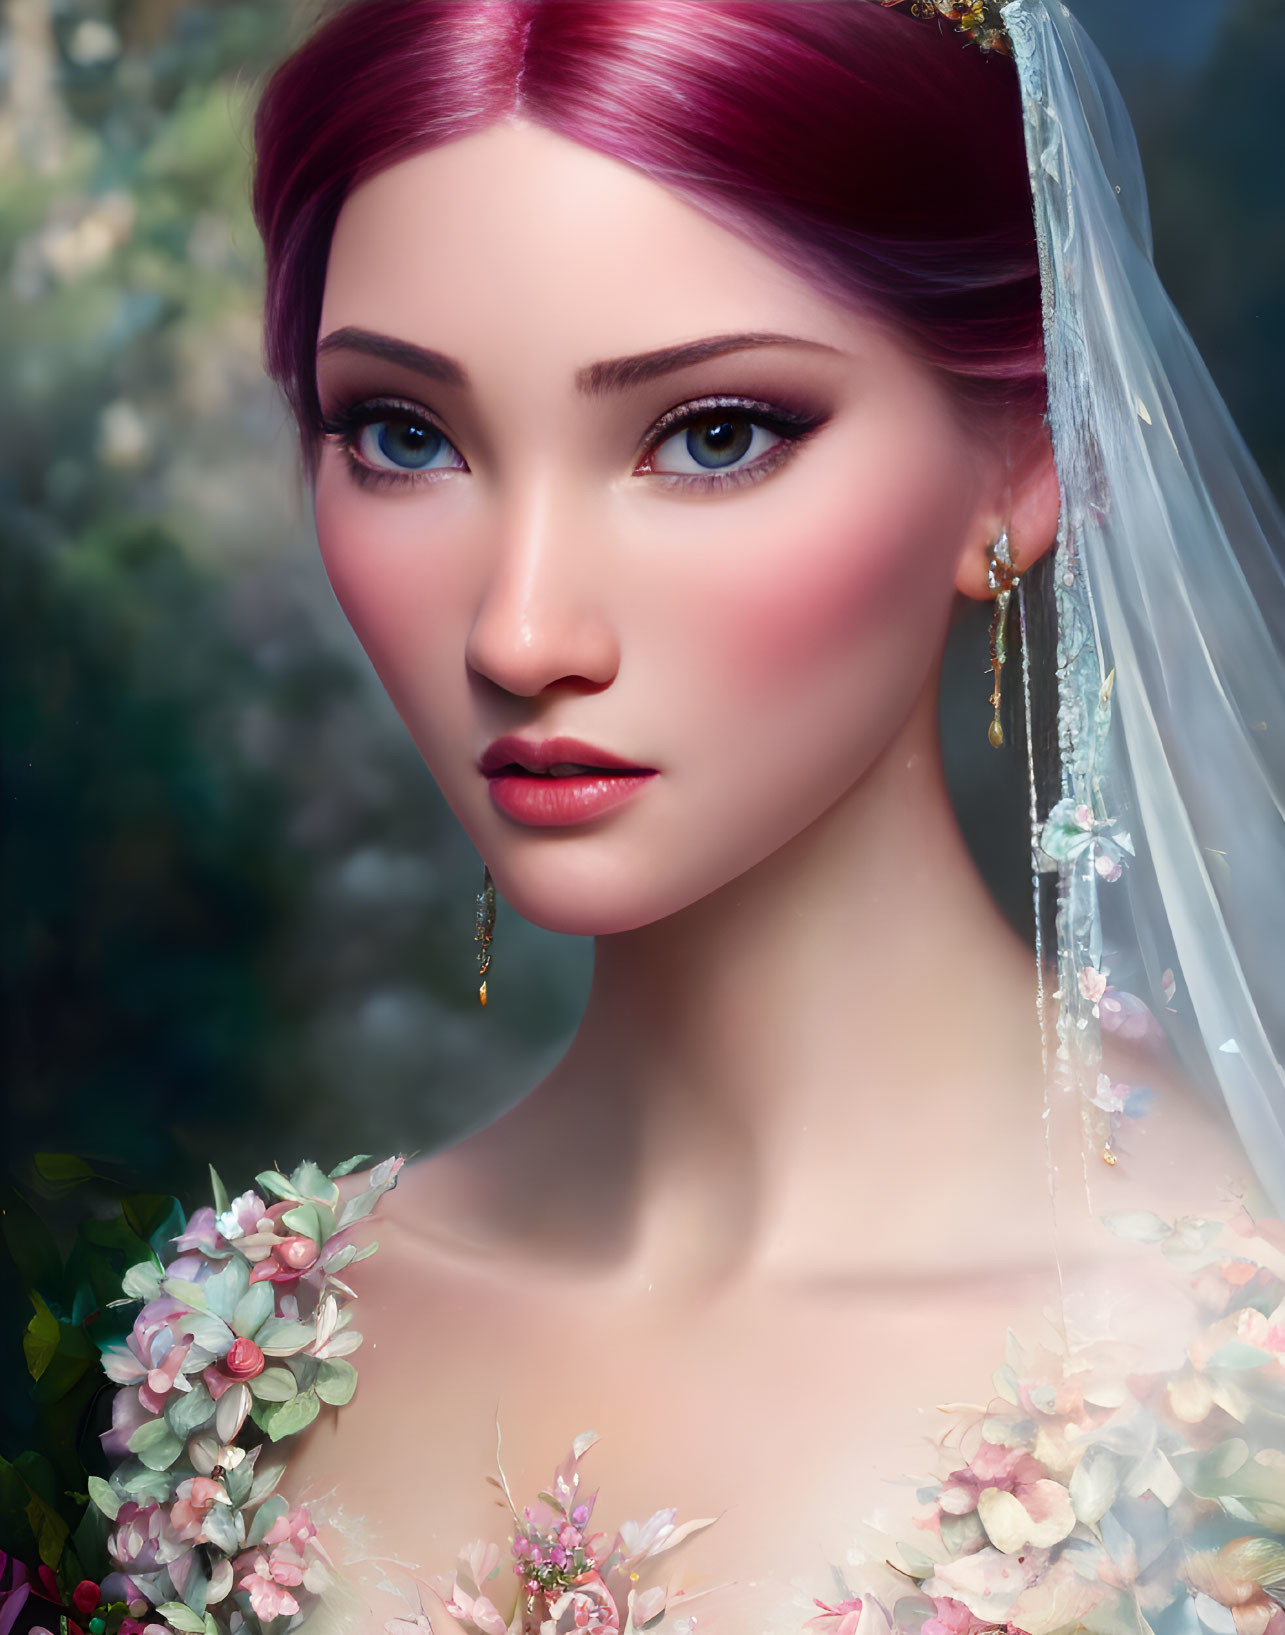 Woman with Violet Hair in Bridal Gown and Veil with Floral Accessories